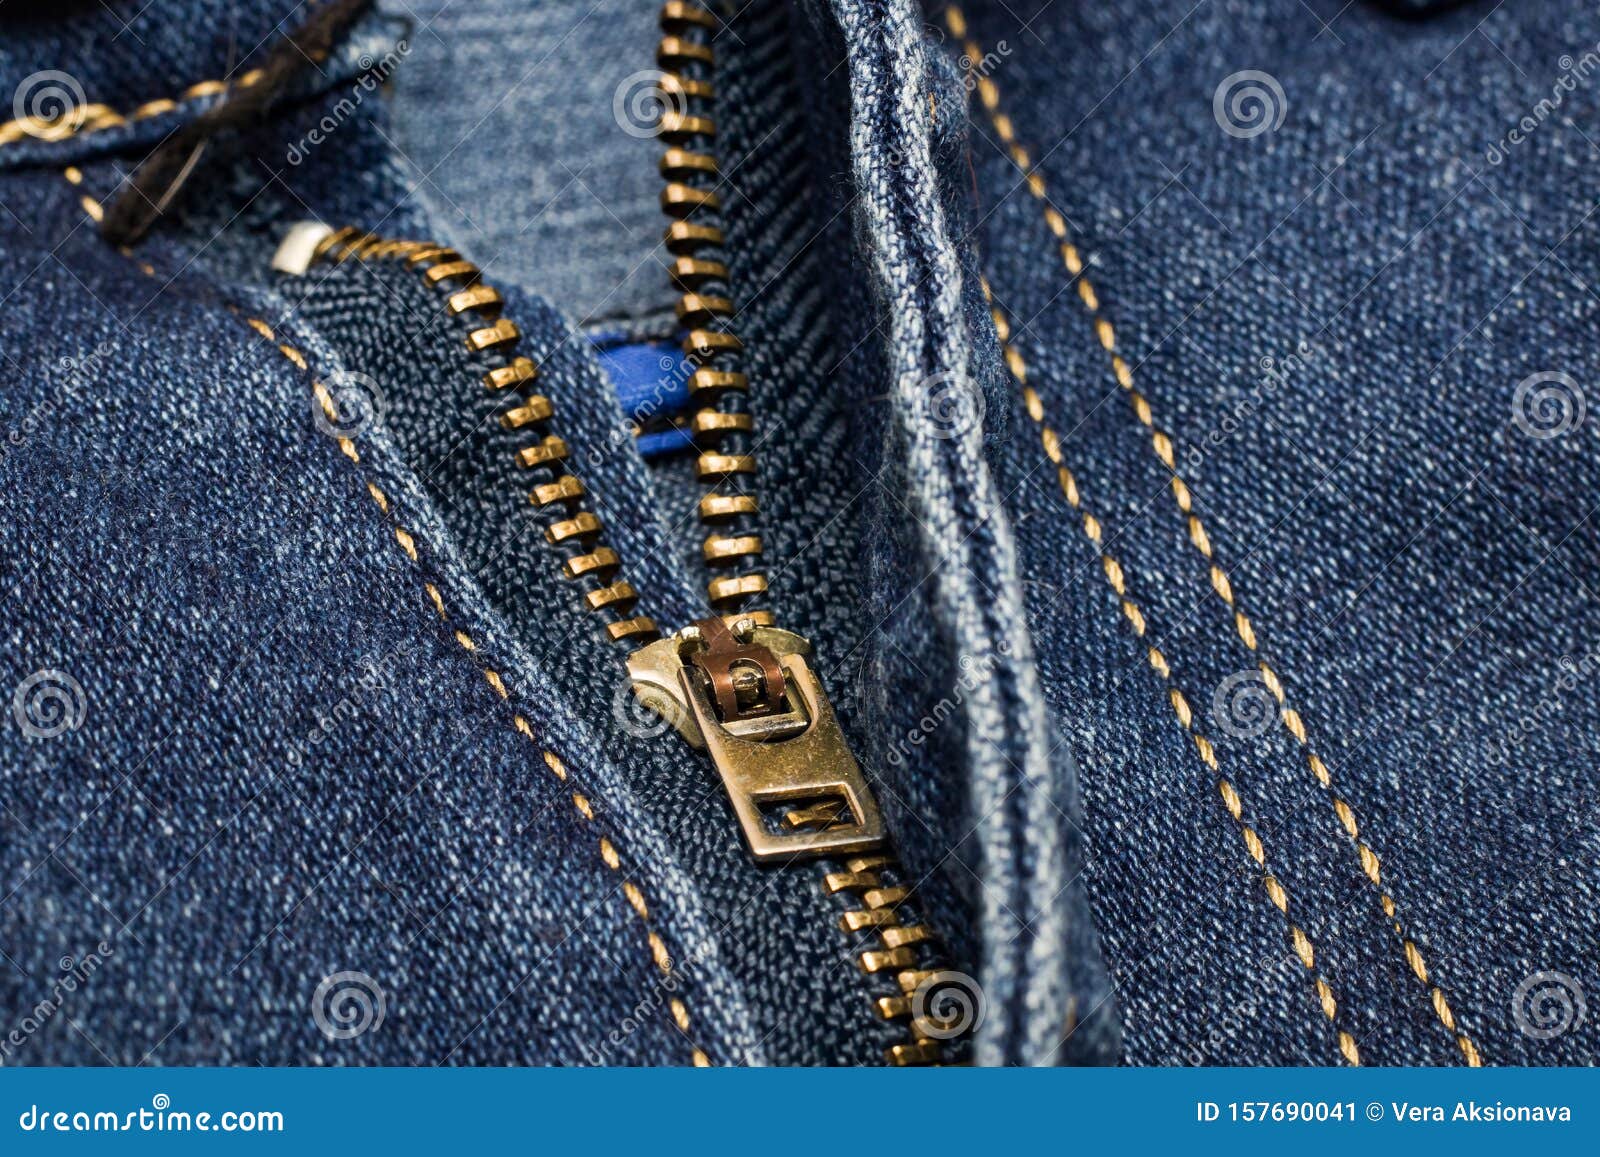 Zipper Lock on Blue Jeans Close Up, Macro Stock Image - Image of clasp ...